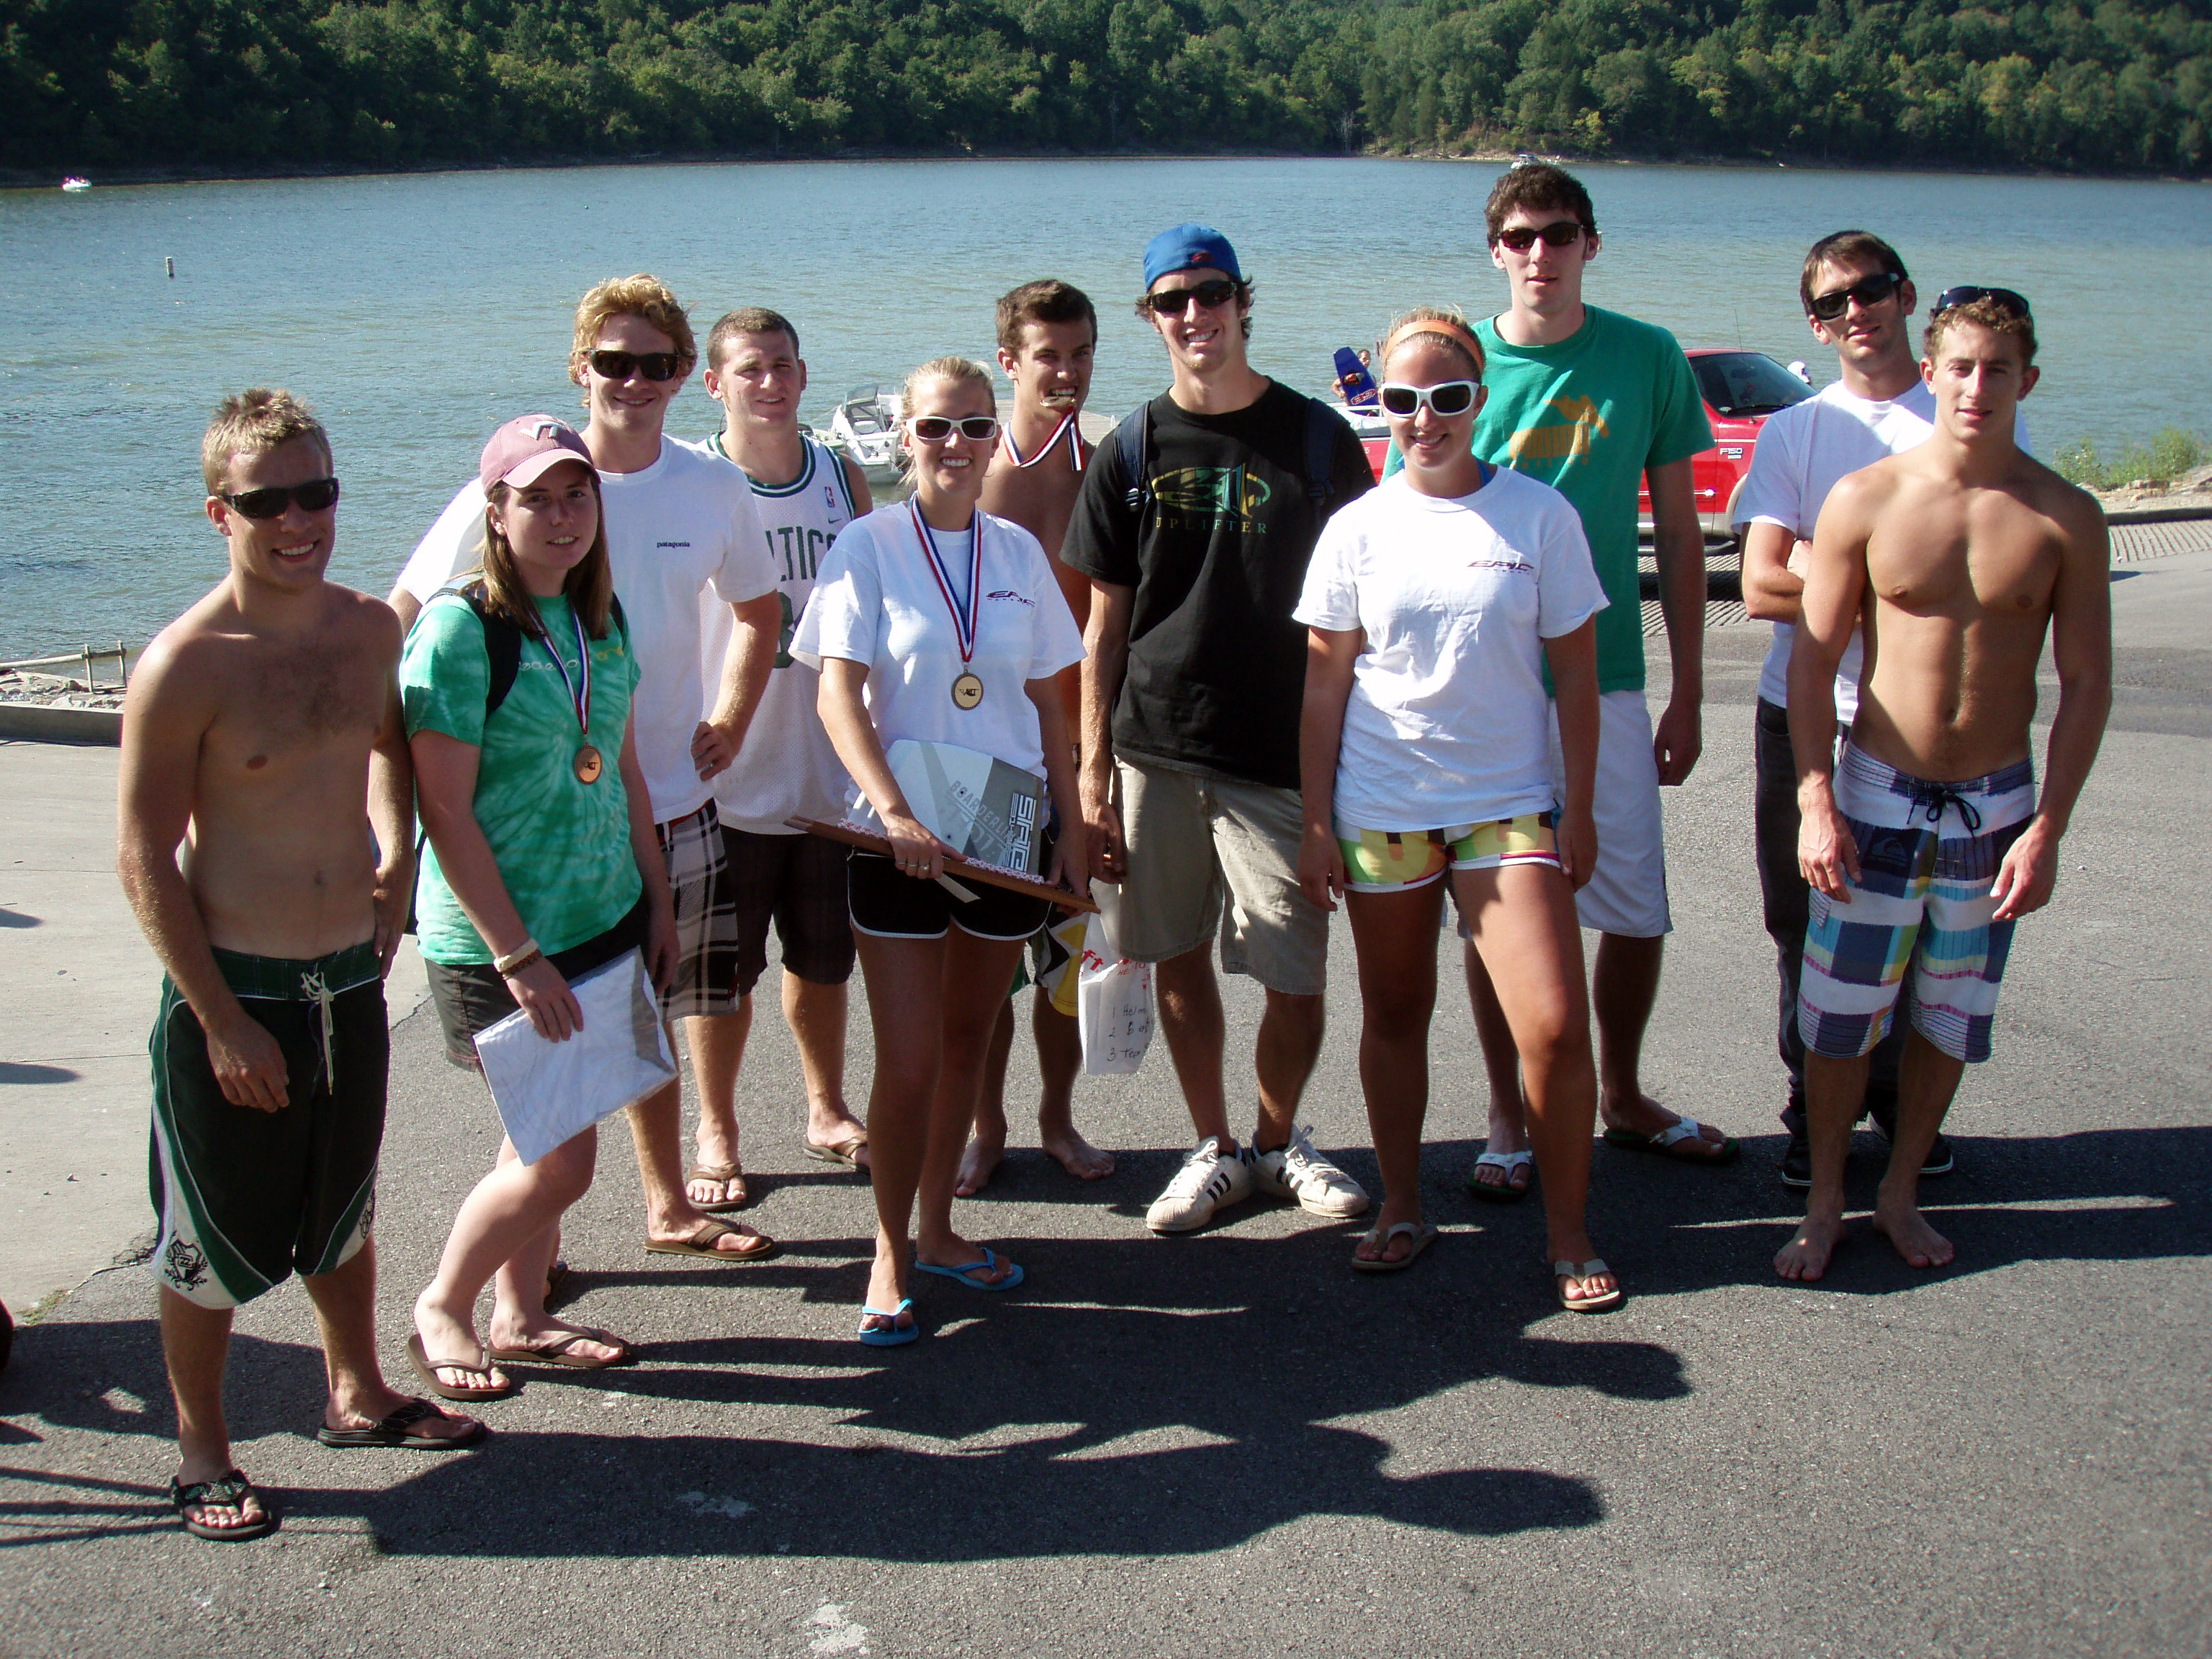 Wakeboard Club wins their first regional title in Lexington, Ky.